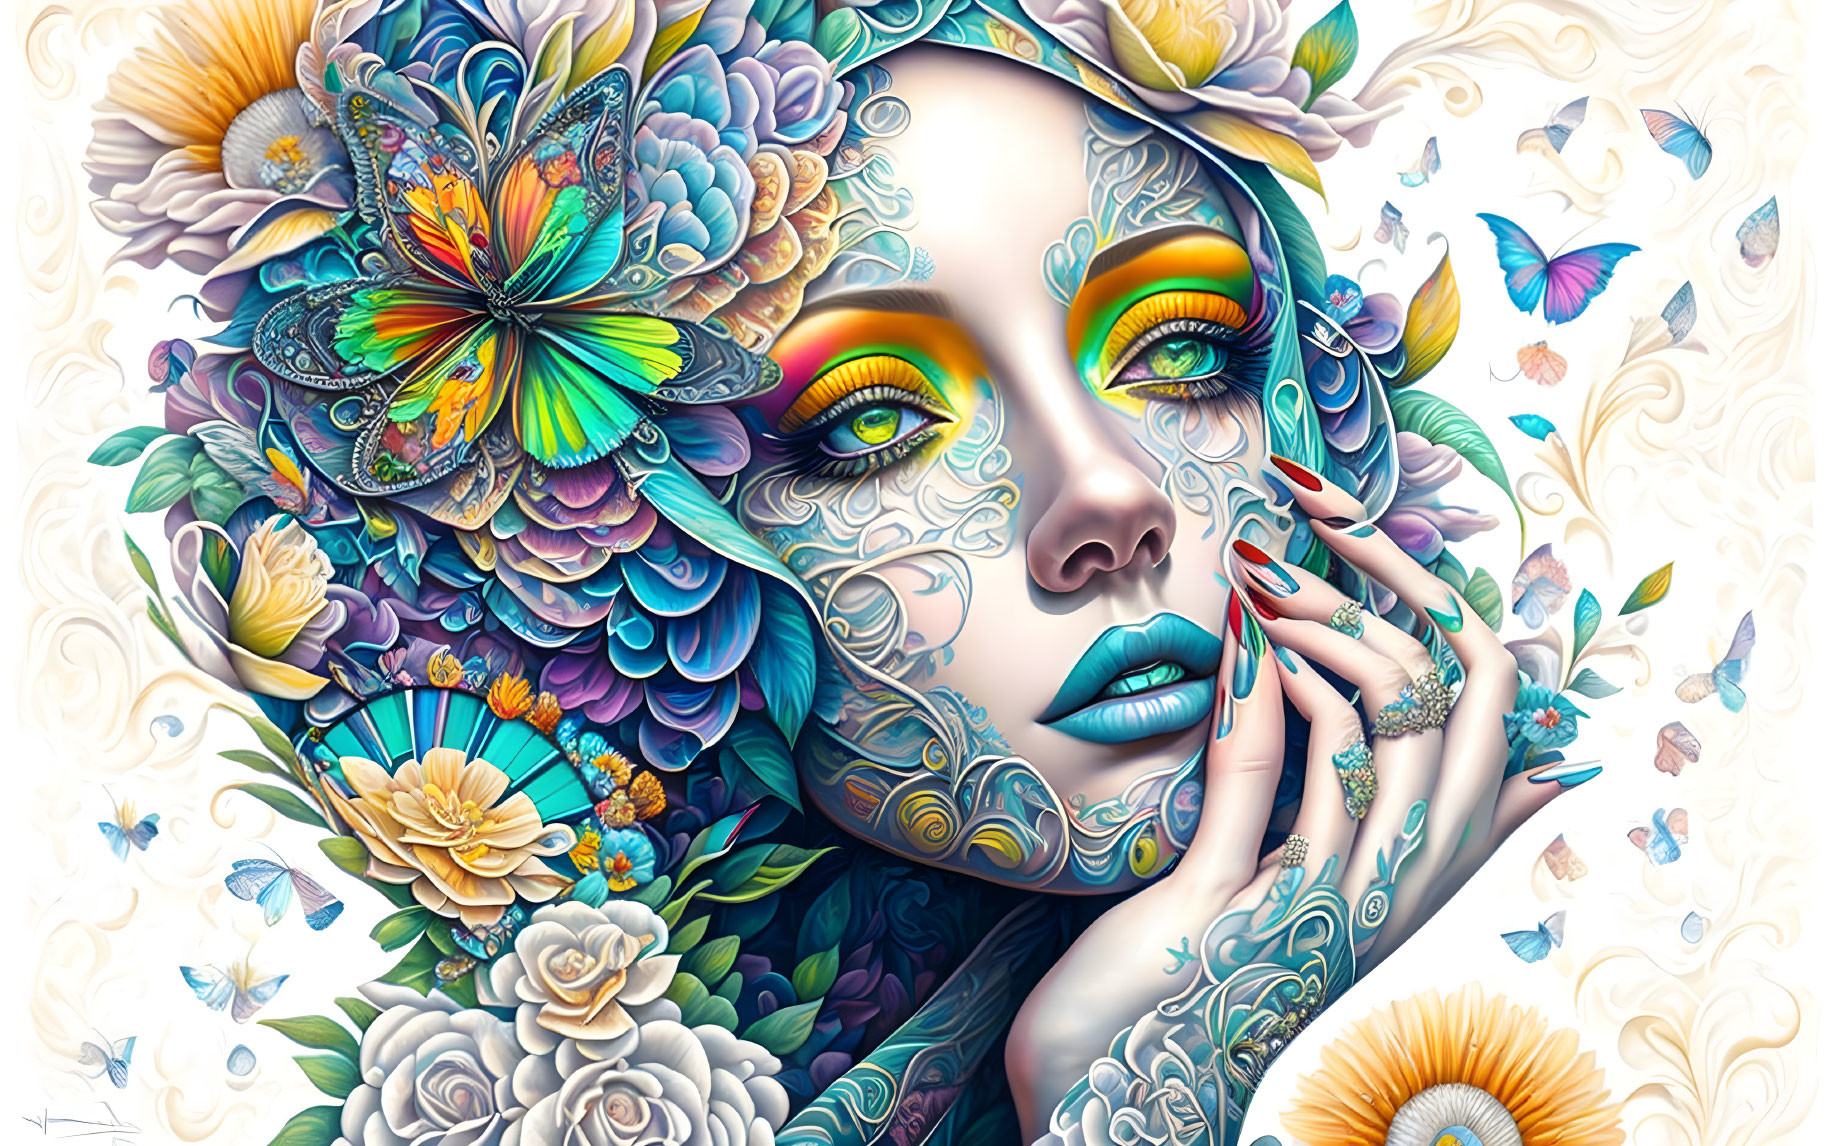 Colorful digital artwork: Woman's face with floral and butterfly motifs